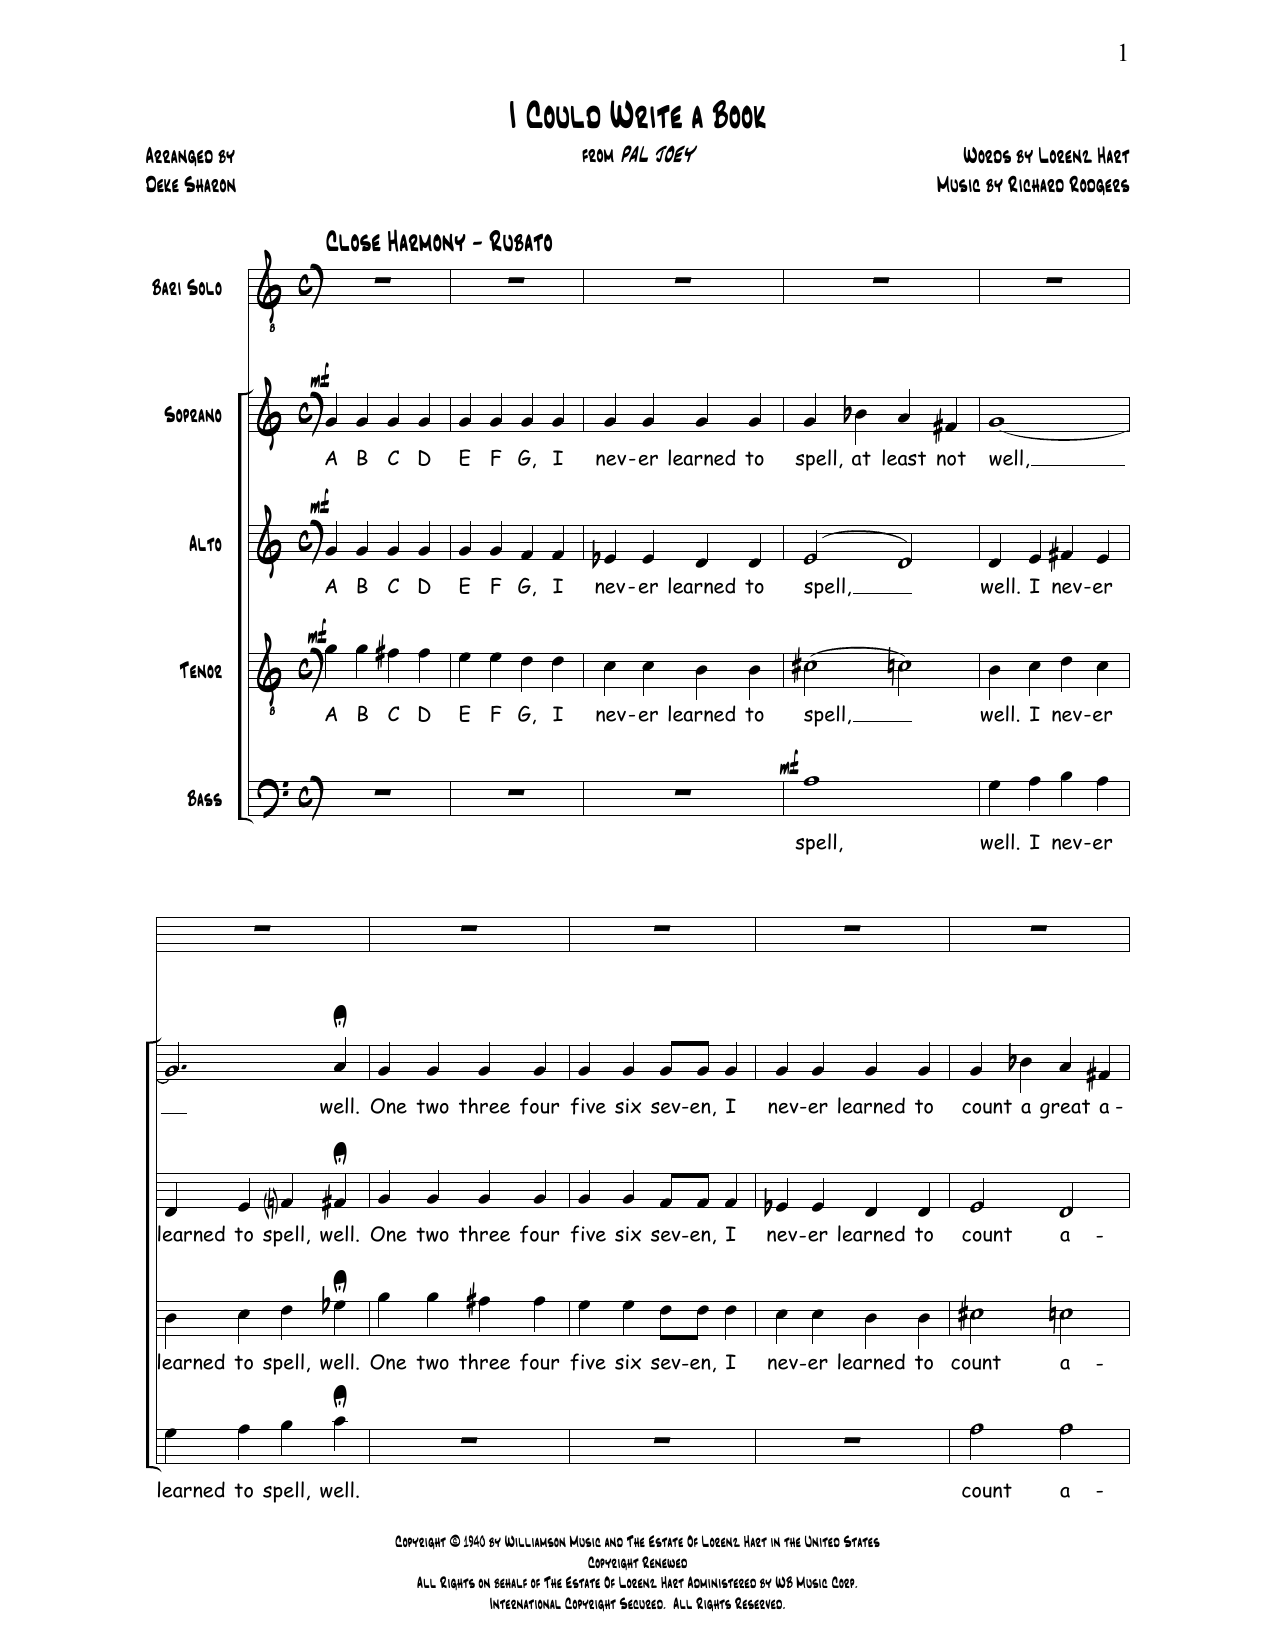 Deke Sharon I Could Write A Book sheet music notes and chords. Download Printable PDF.